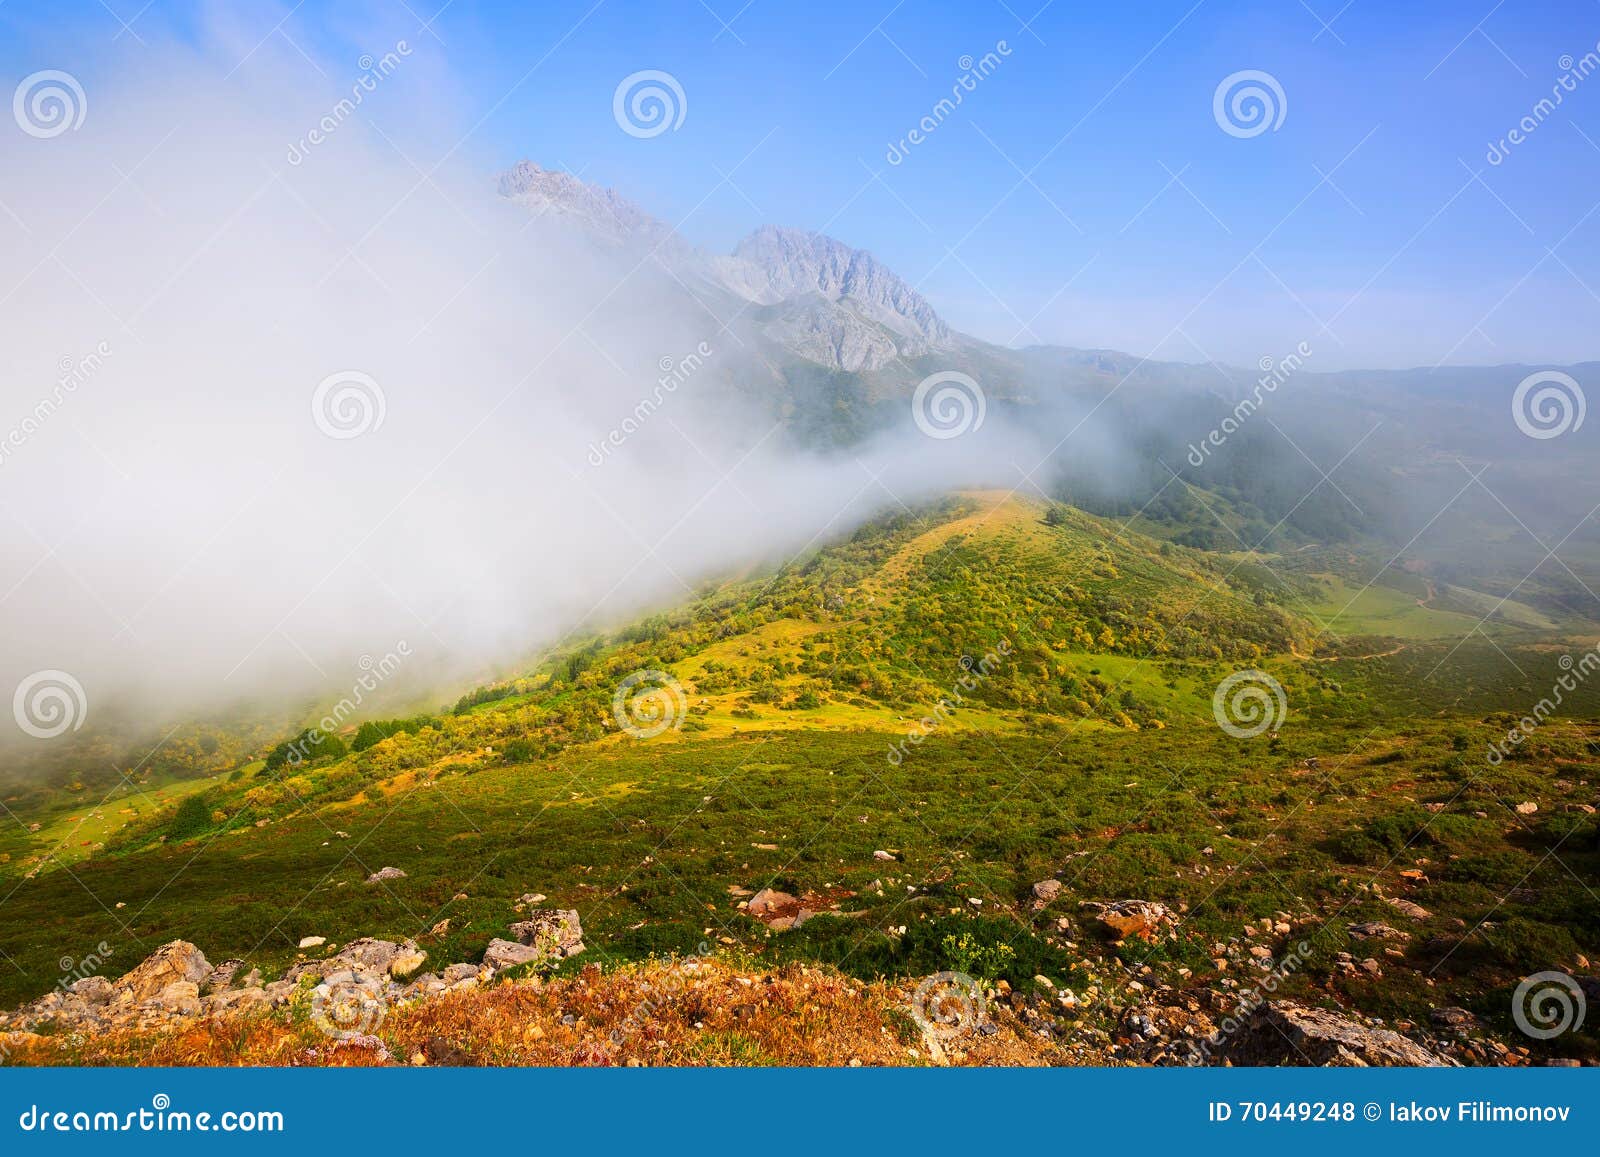 fog over mountains in summer